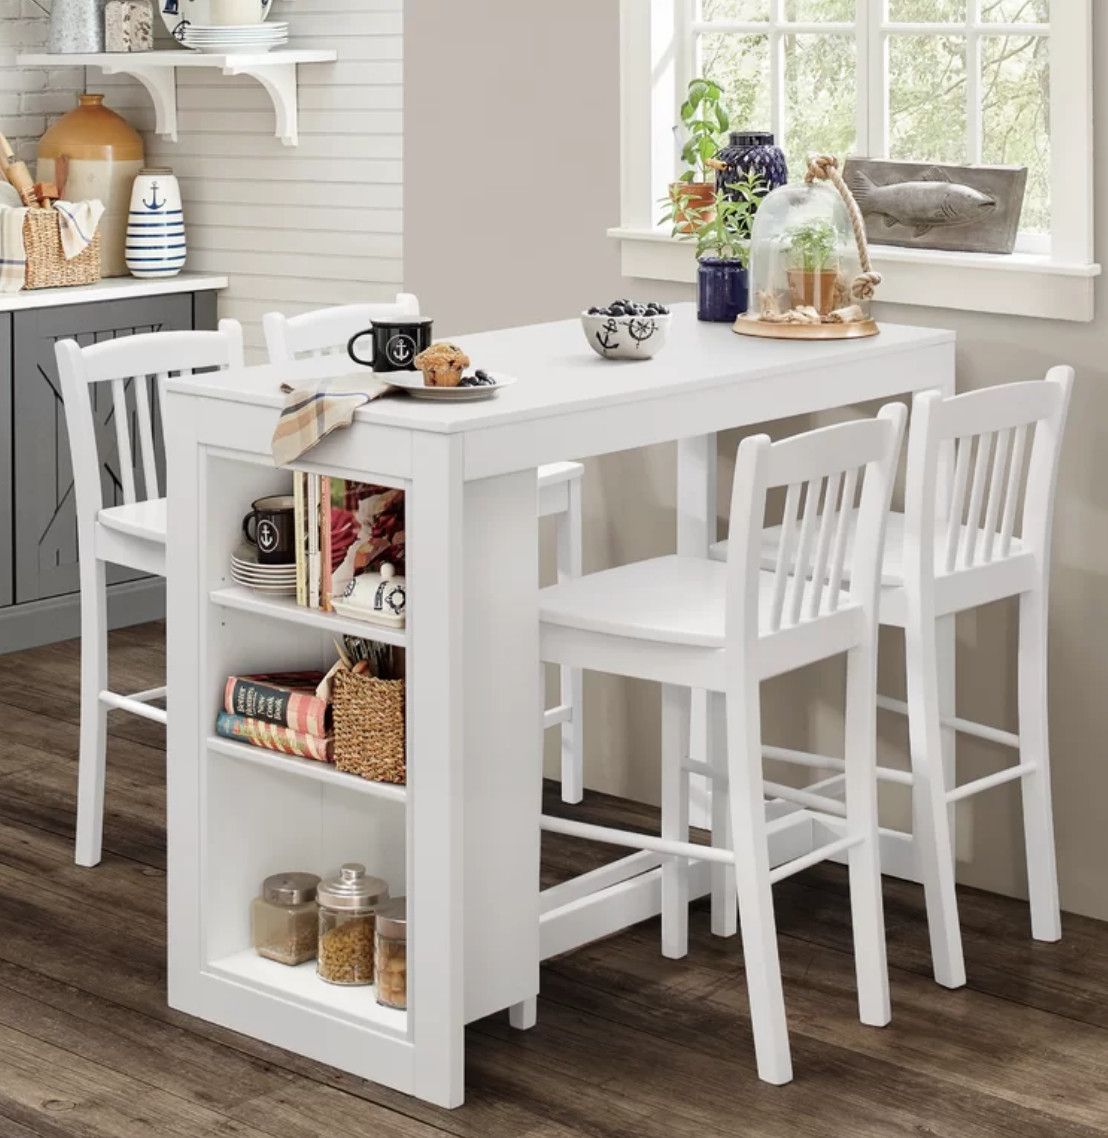 Dining Tables For Small Spaces – Small Spaces – Lonny For Most Recent Taulbee 5 Piece Dining Sets (View 17 of 20)